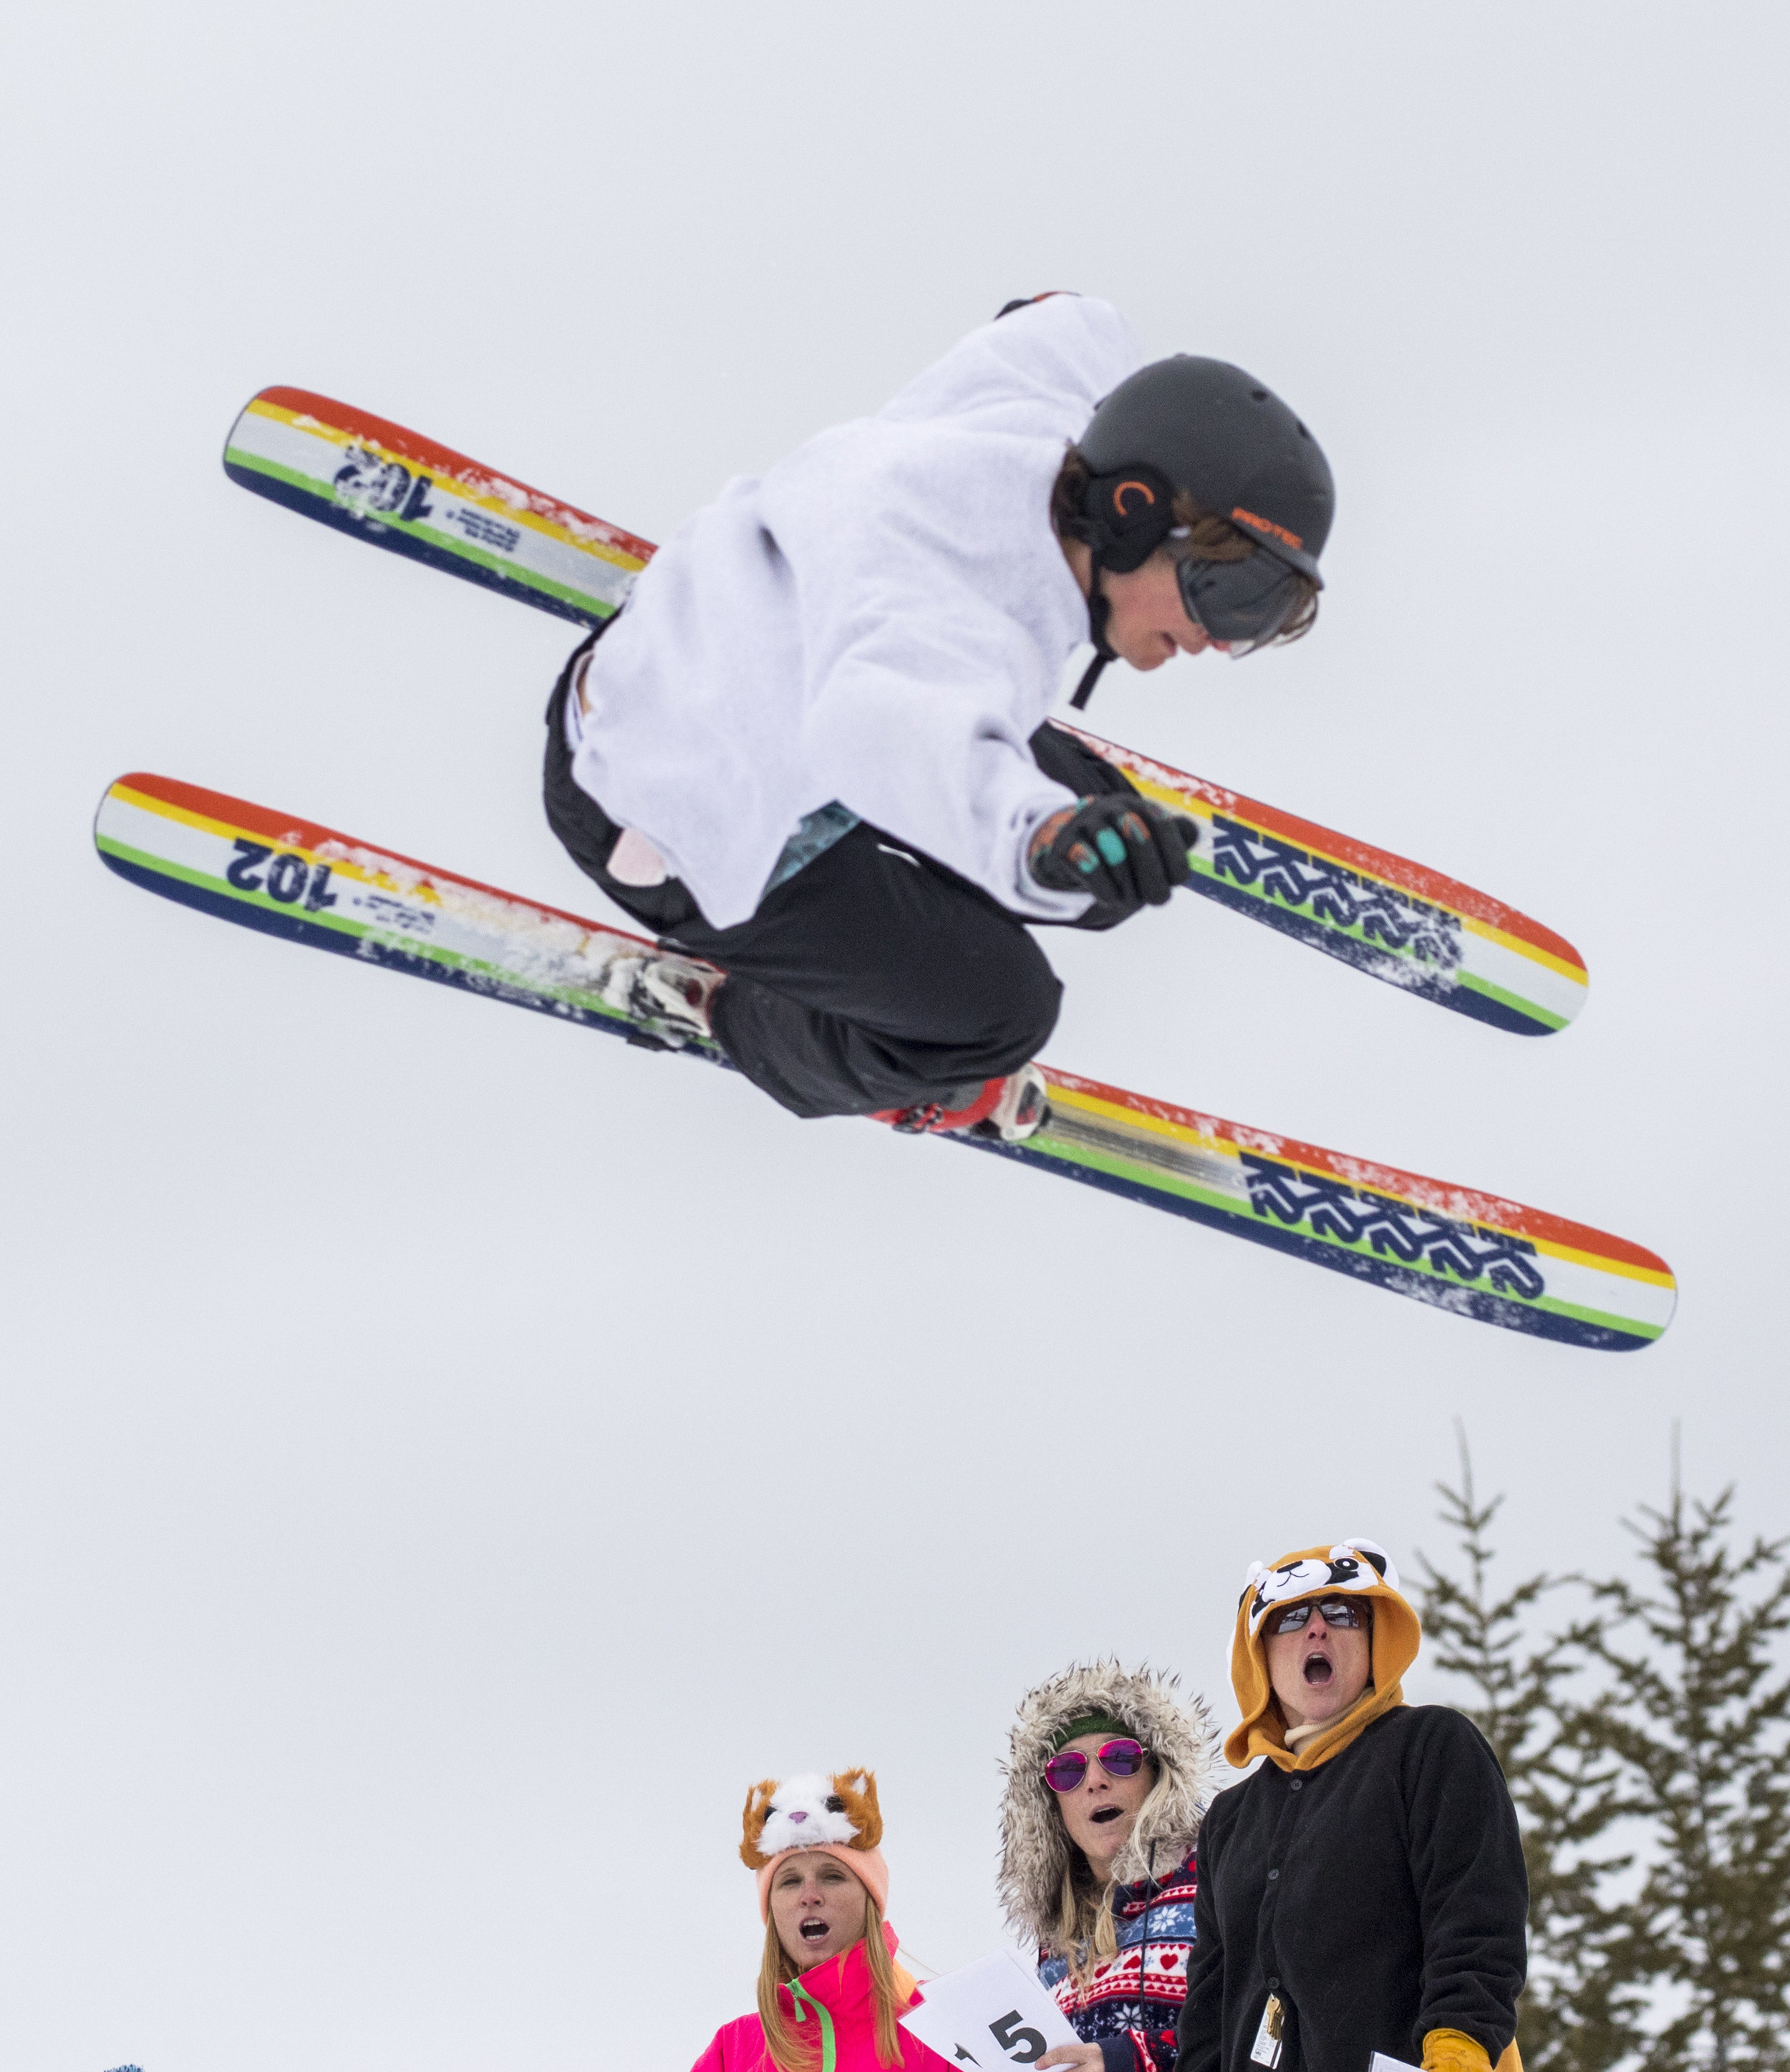  Tyler Smith impresses judges Steph Buelow, Beth Byrd and Traci Prenot Friday during the Sick Trick competition at Grand Targhee Resort on March 30, 2018 in Alta, Wyo. 